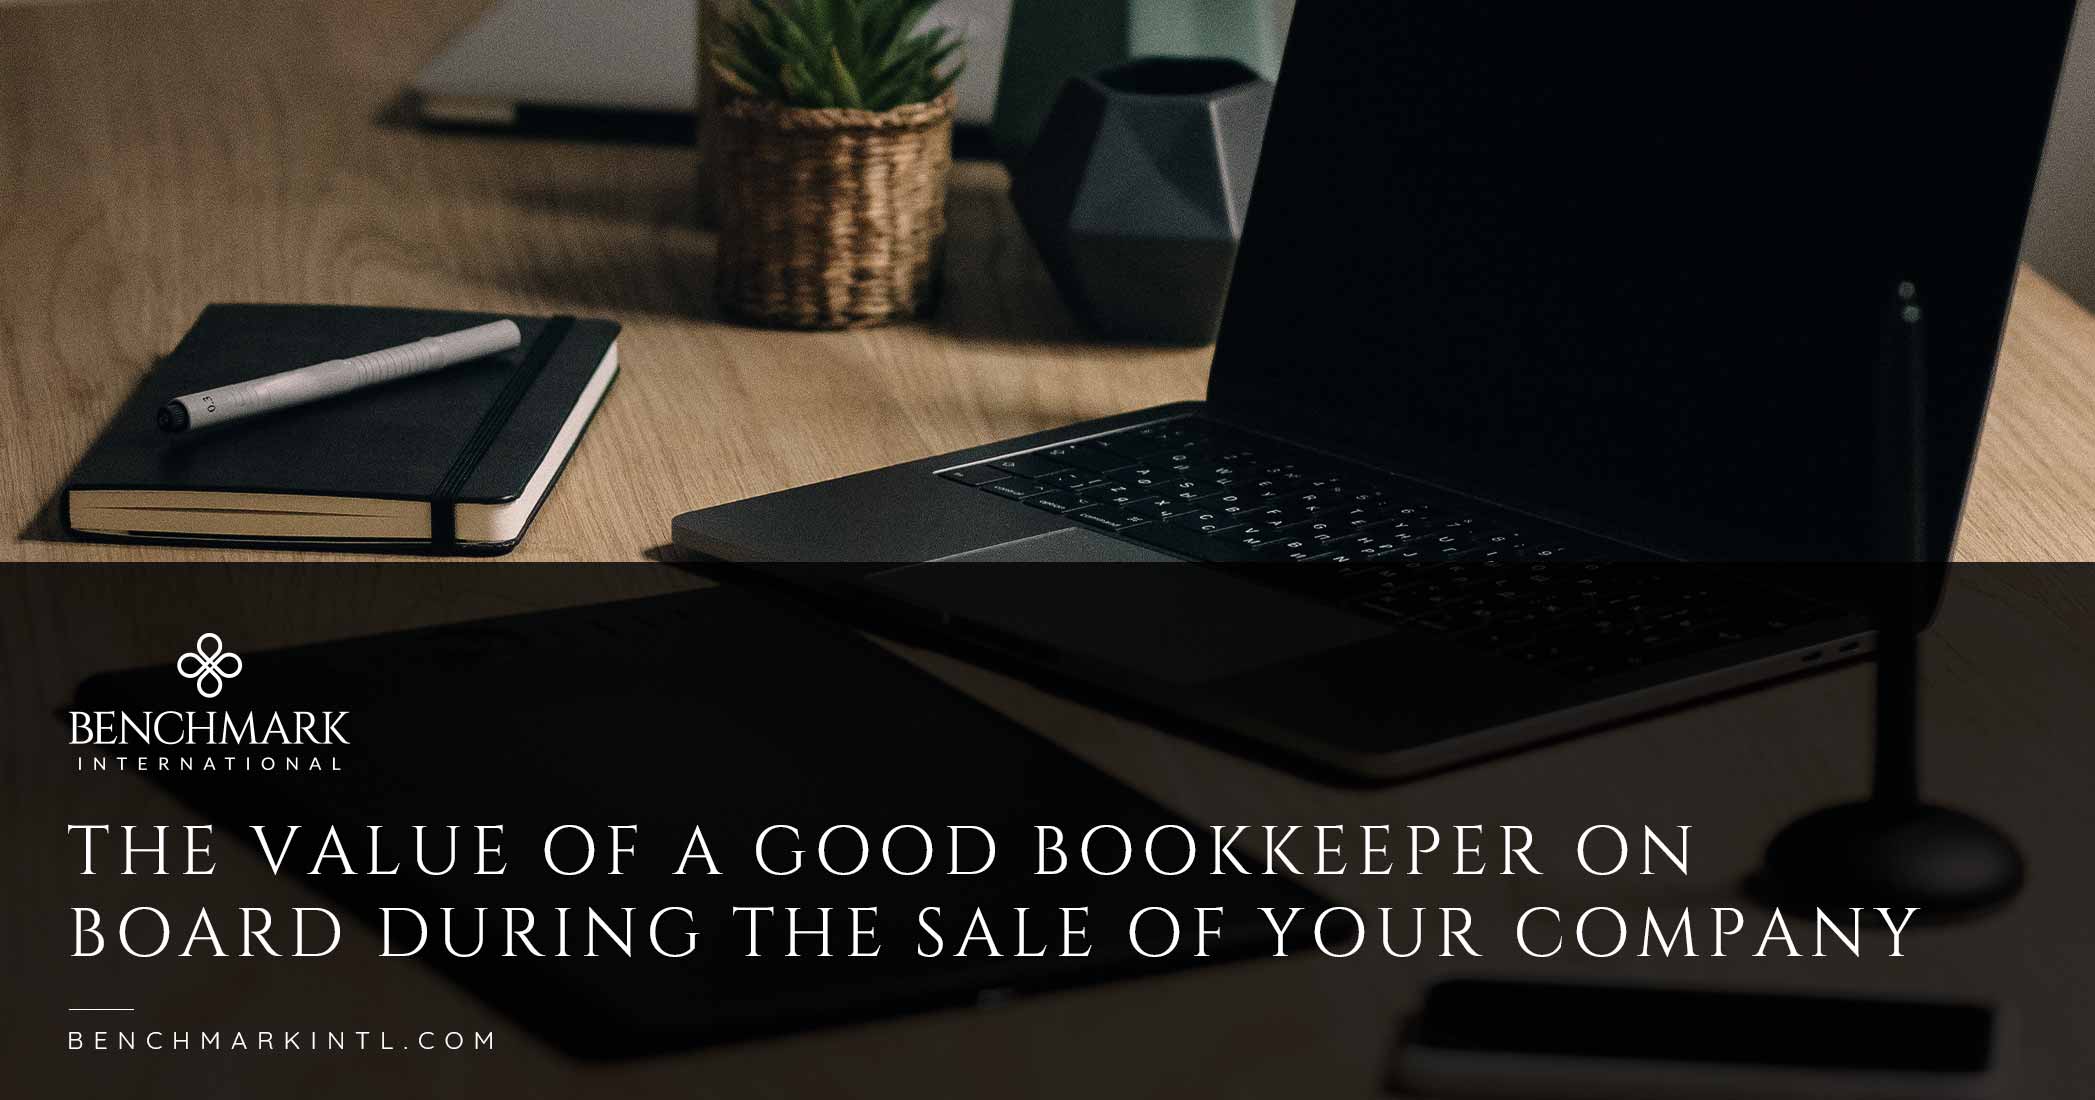 The Value Of A Good Bookkeeper On Board During The Sale Of Your Company